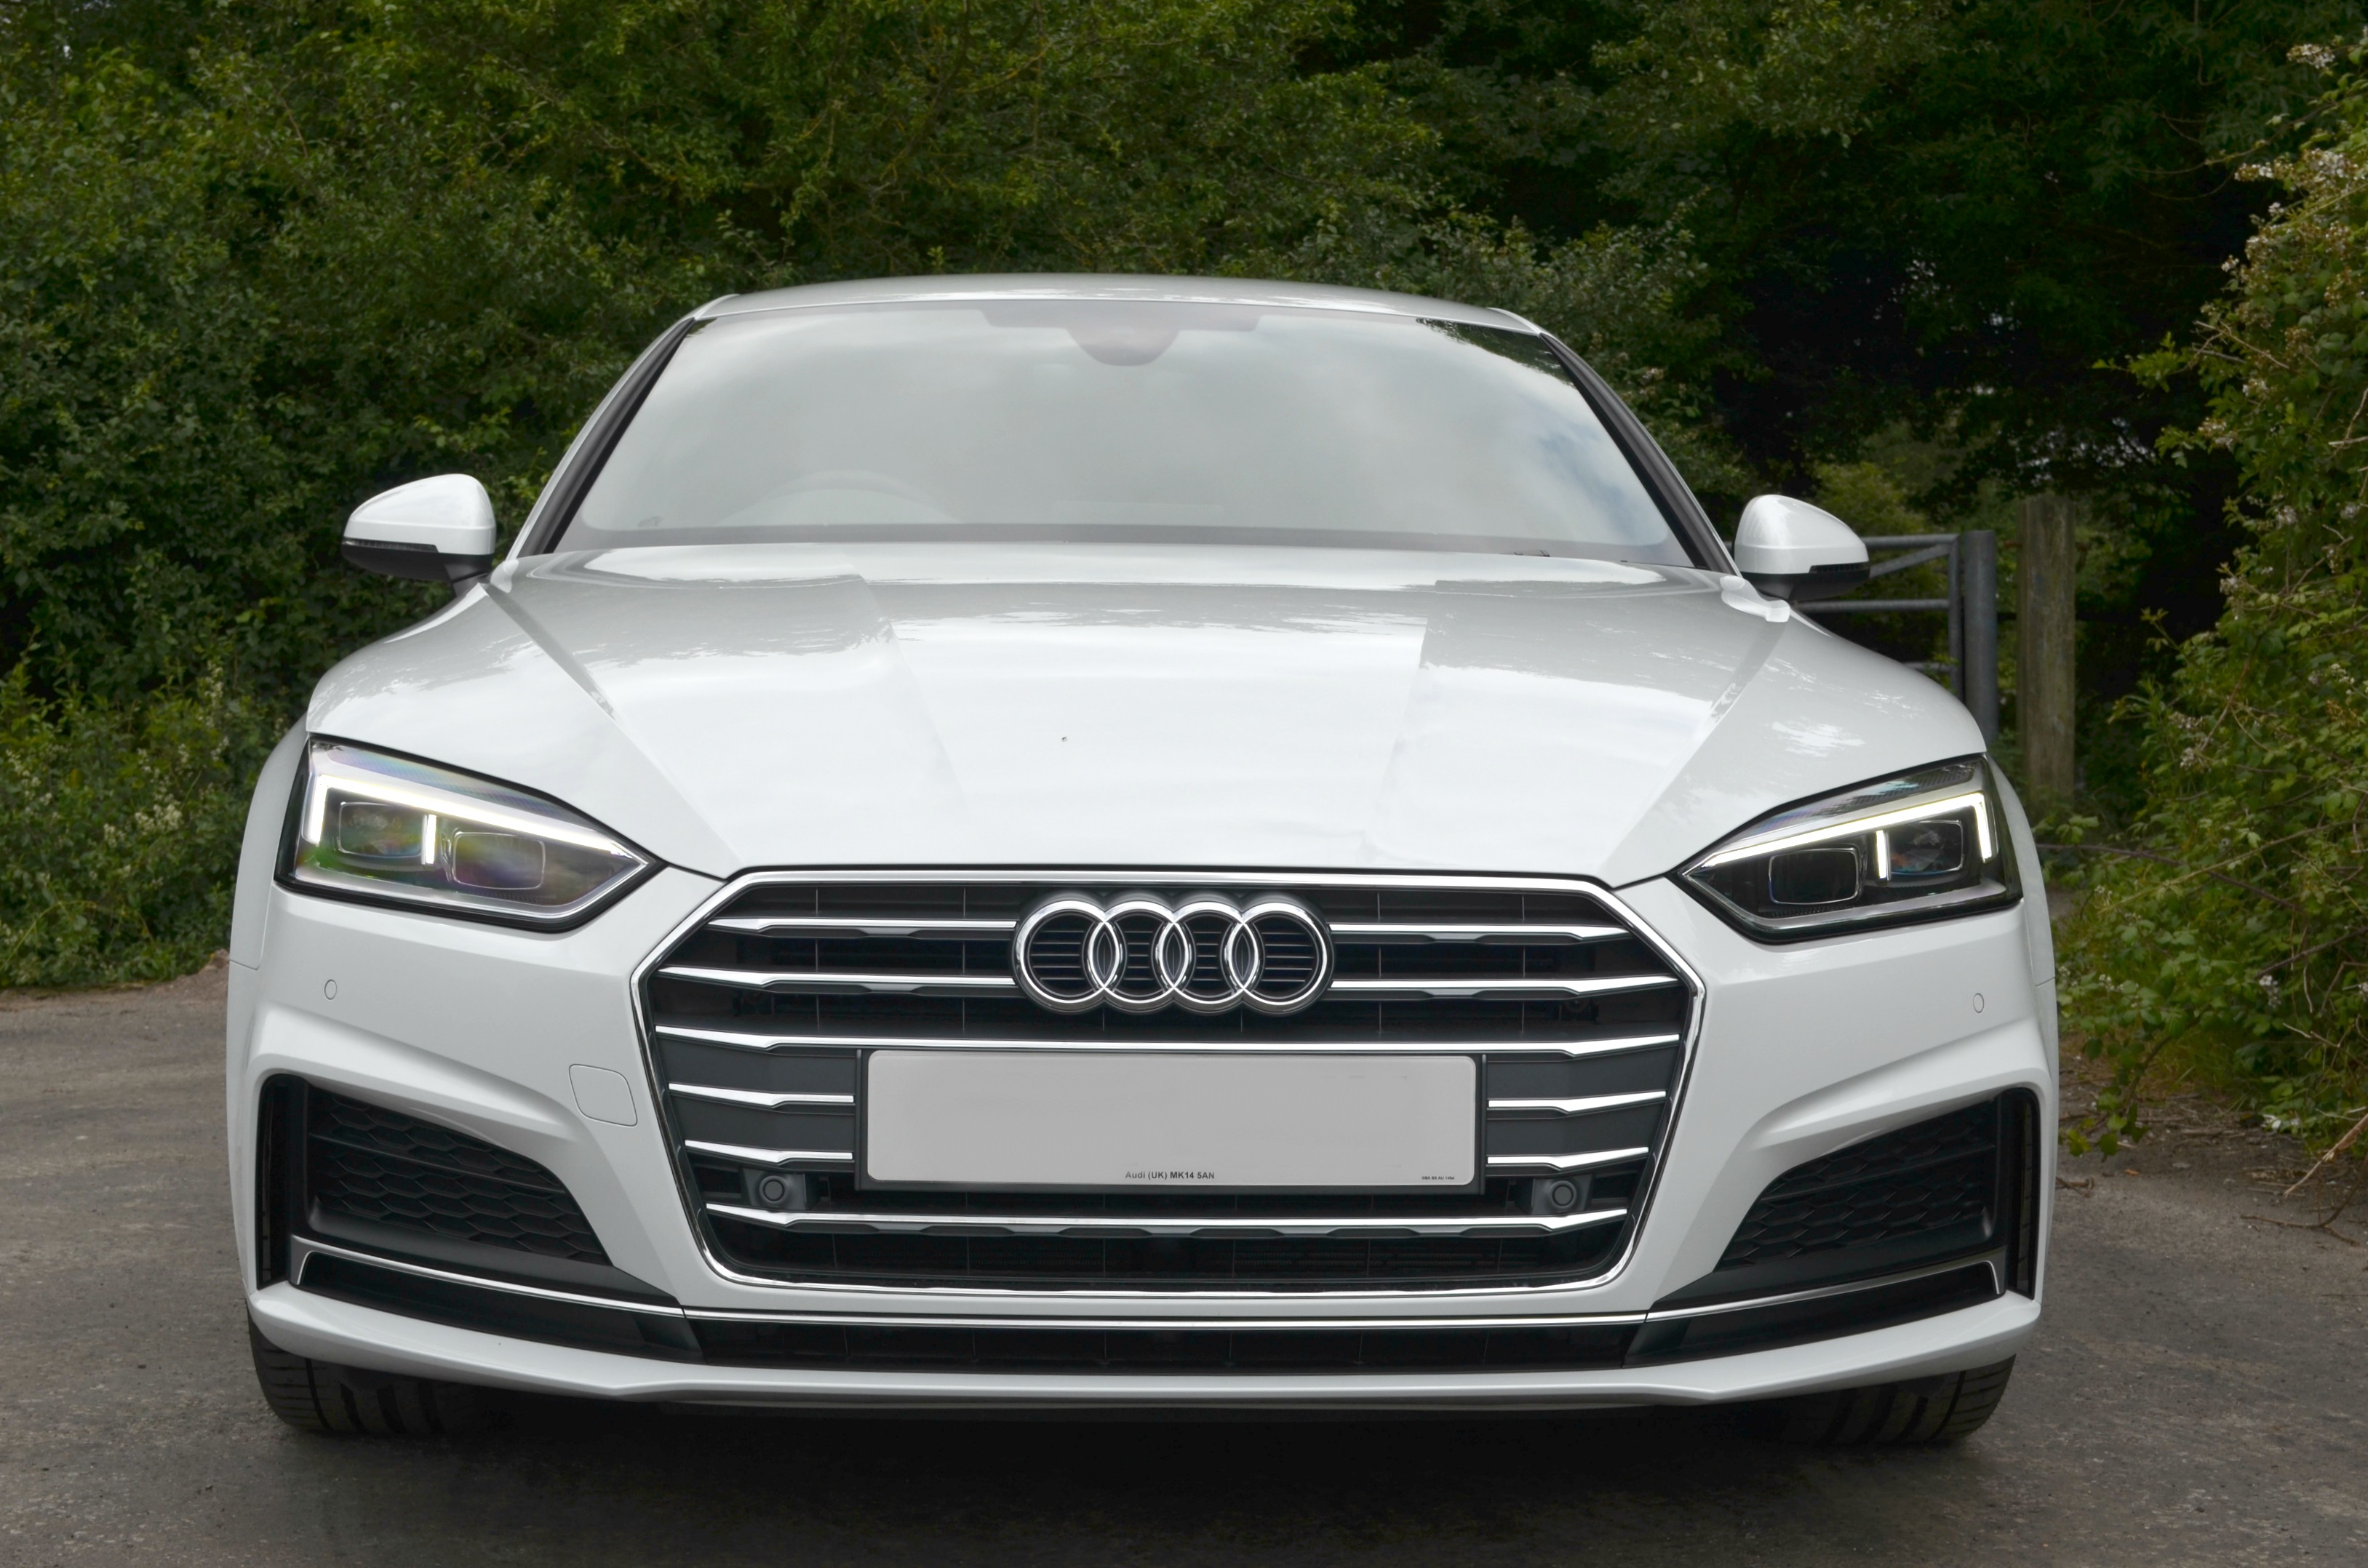 Audi A5 S Line Ultra Drive South West Luxury Prestige And Sports Car